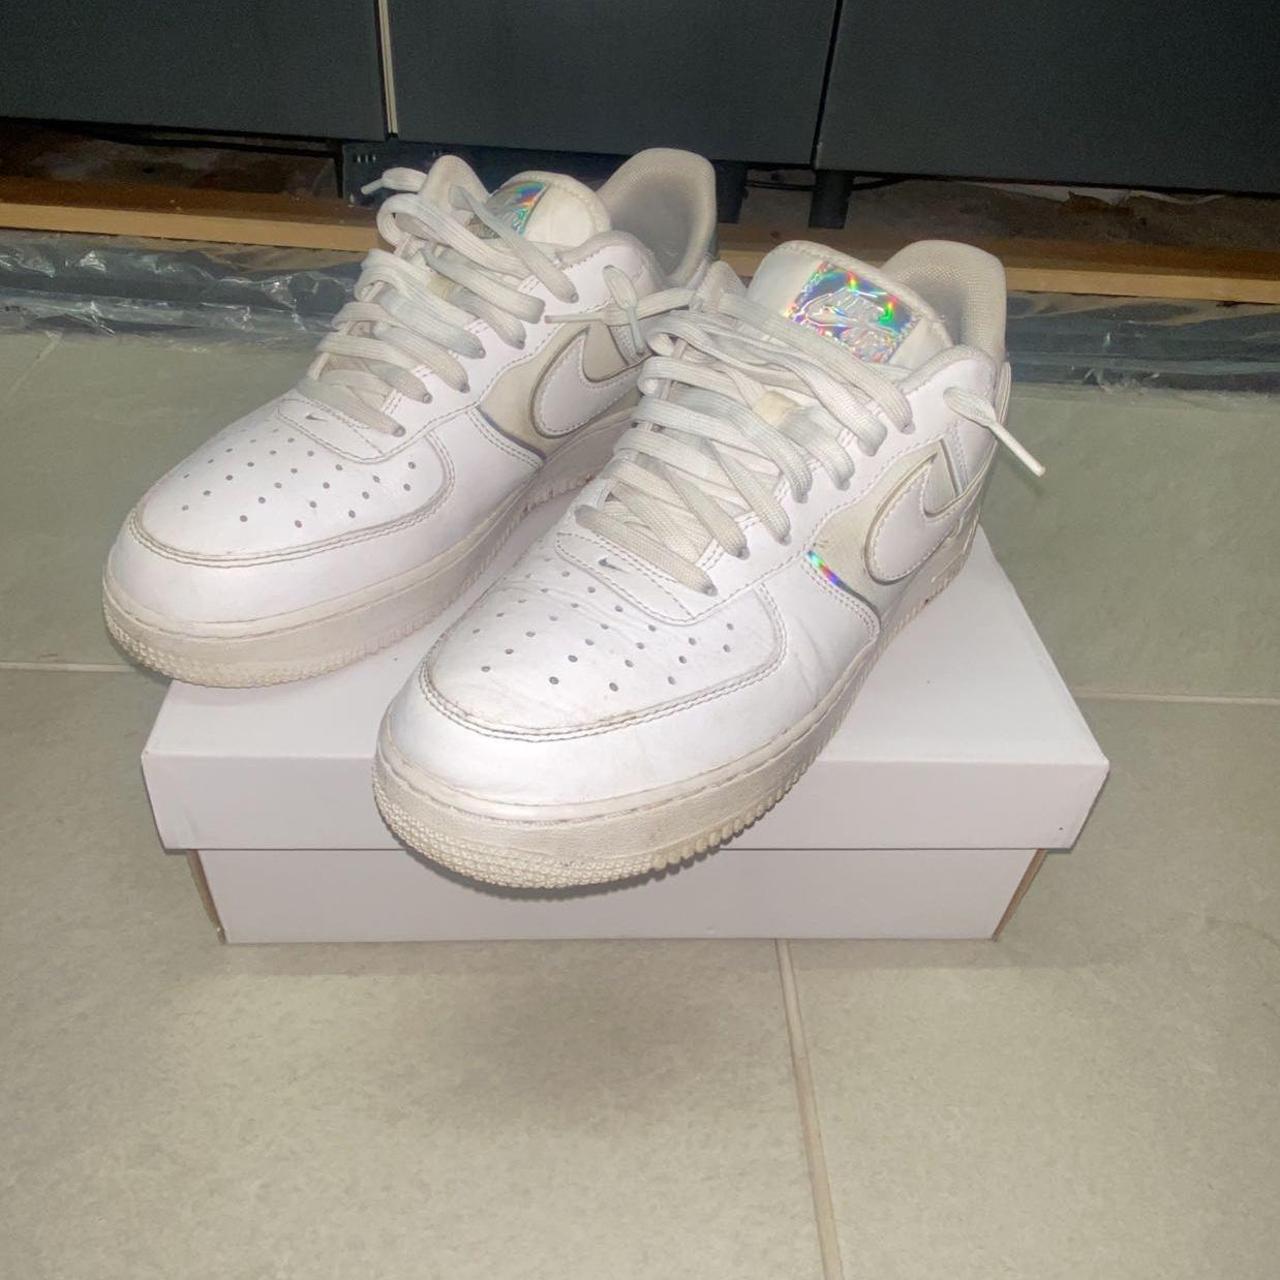 Nike air force 1 white and silver reflective good... - Depop